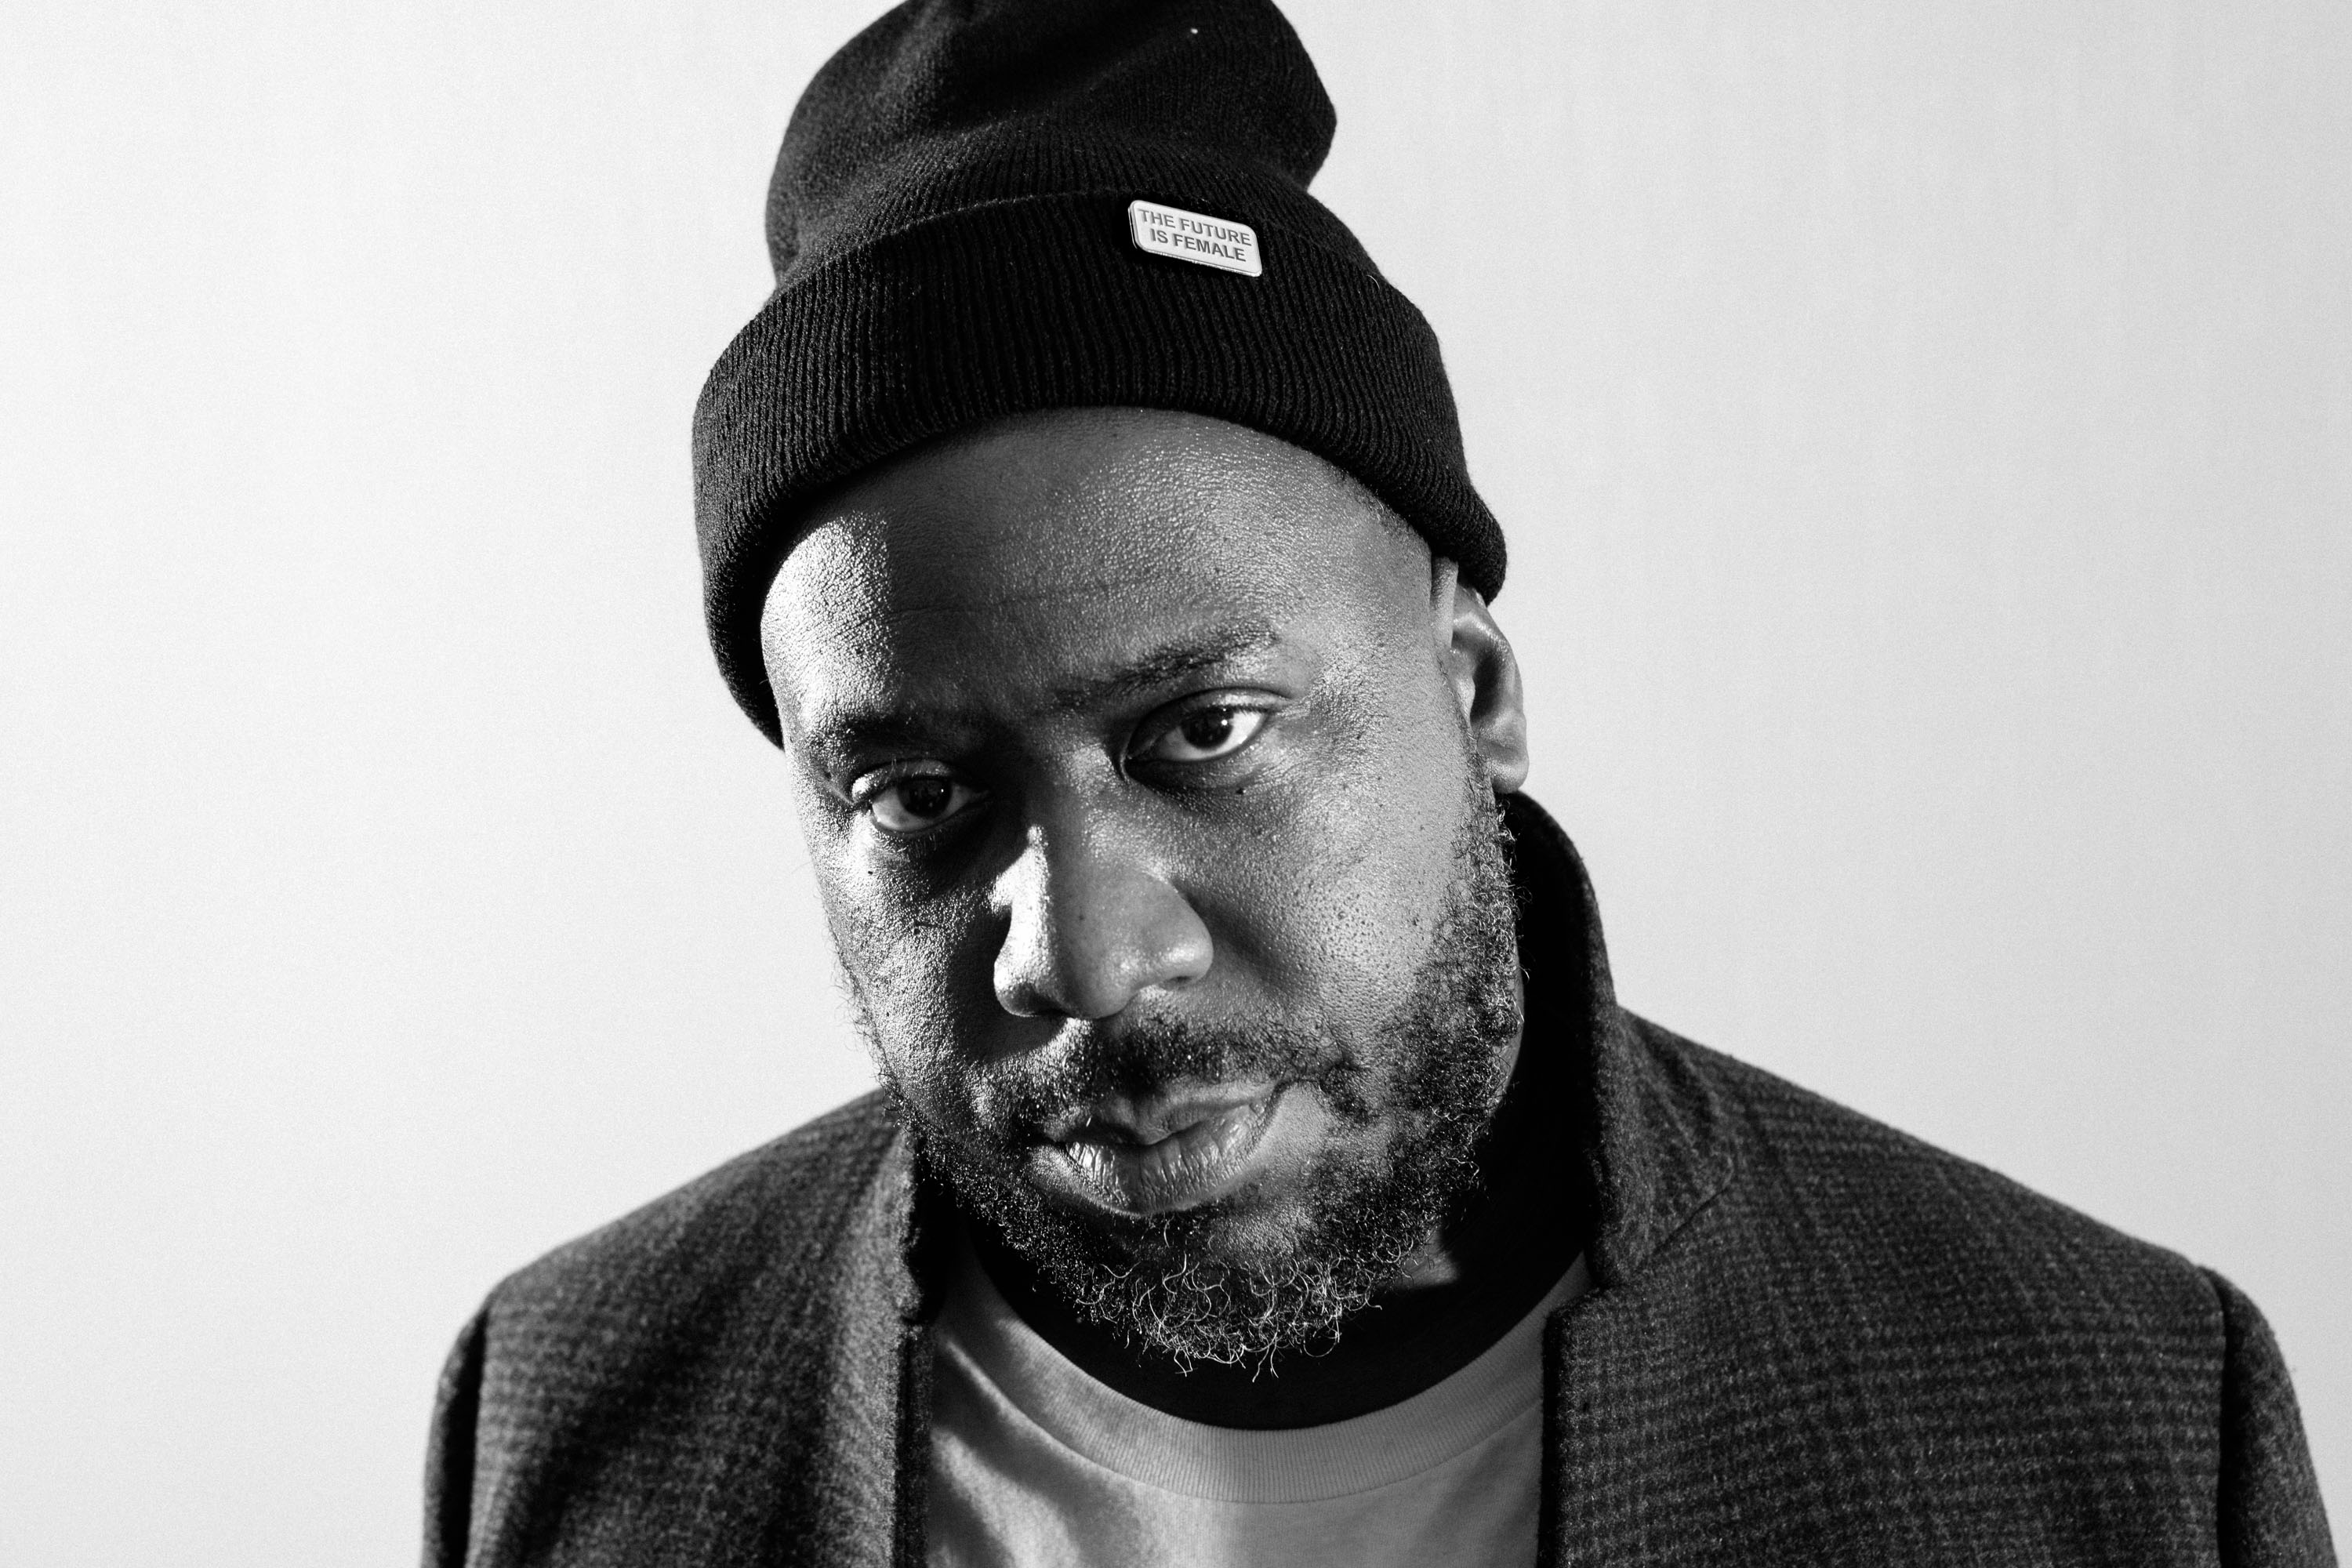 Robert Glasper Announces New Mixtape Fuck Yo Feelings Featuring Yasiin Bey  (Mos Def), Herbie Hancock and More for October 2019 Release - mxdwn Music